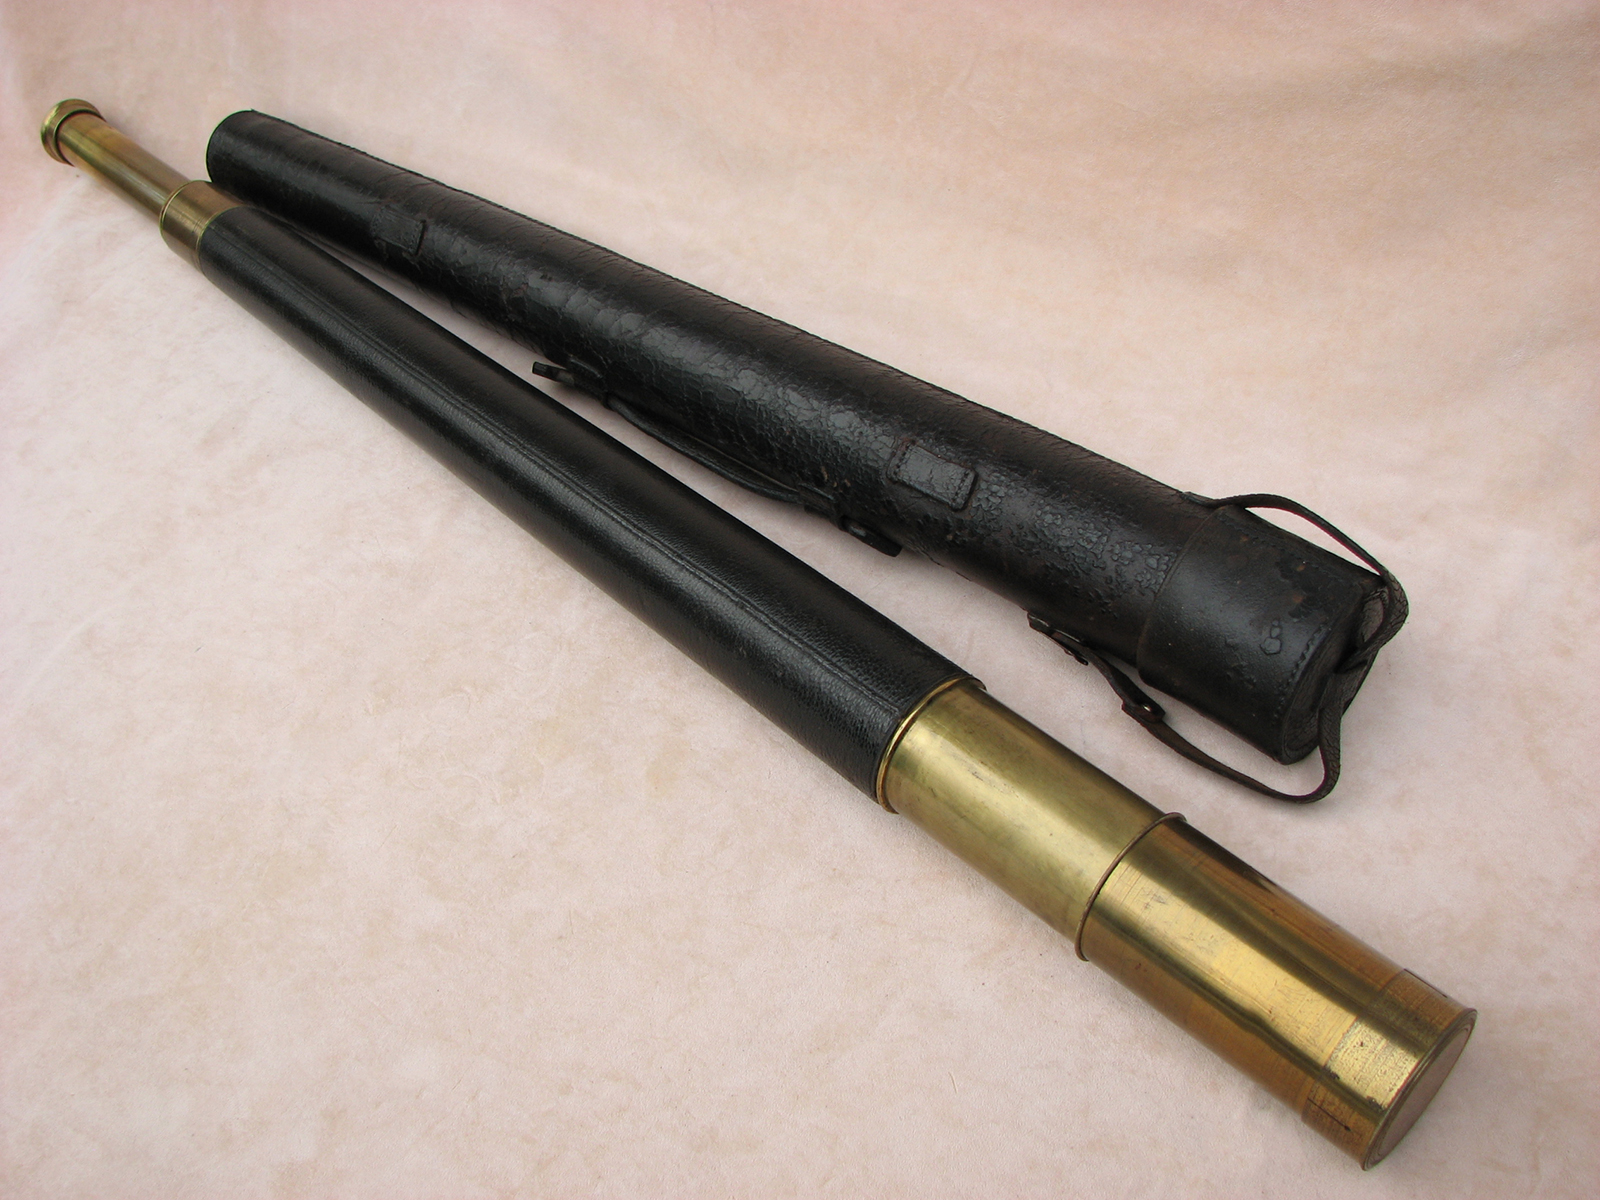 Dollond 19th century Naval telescope with Benetfink case